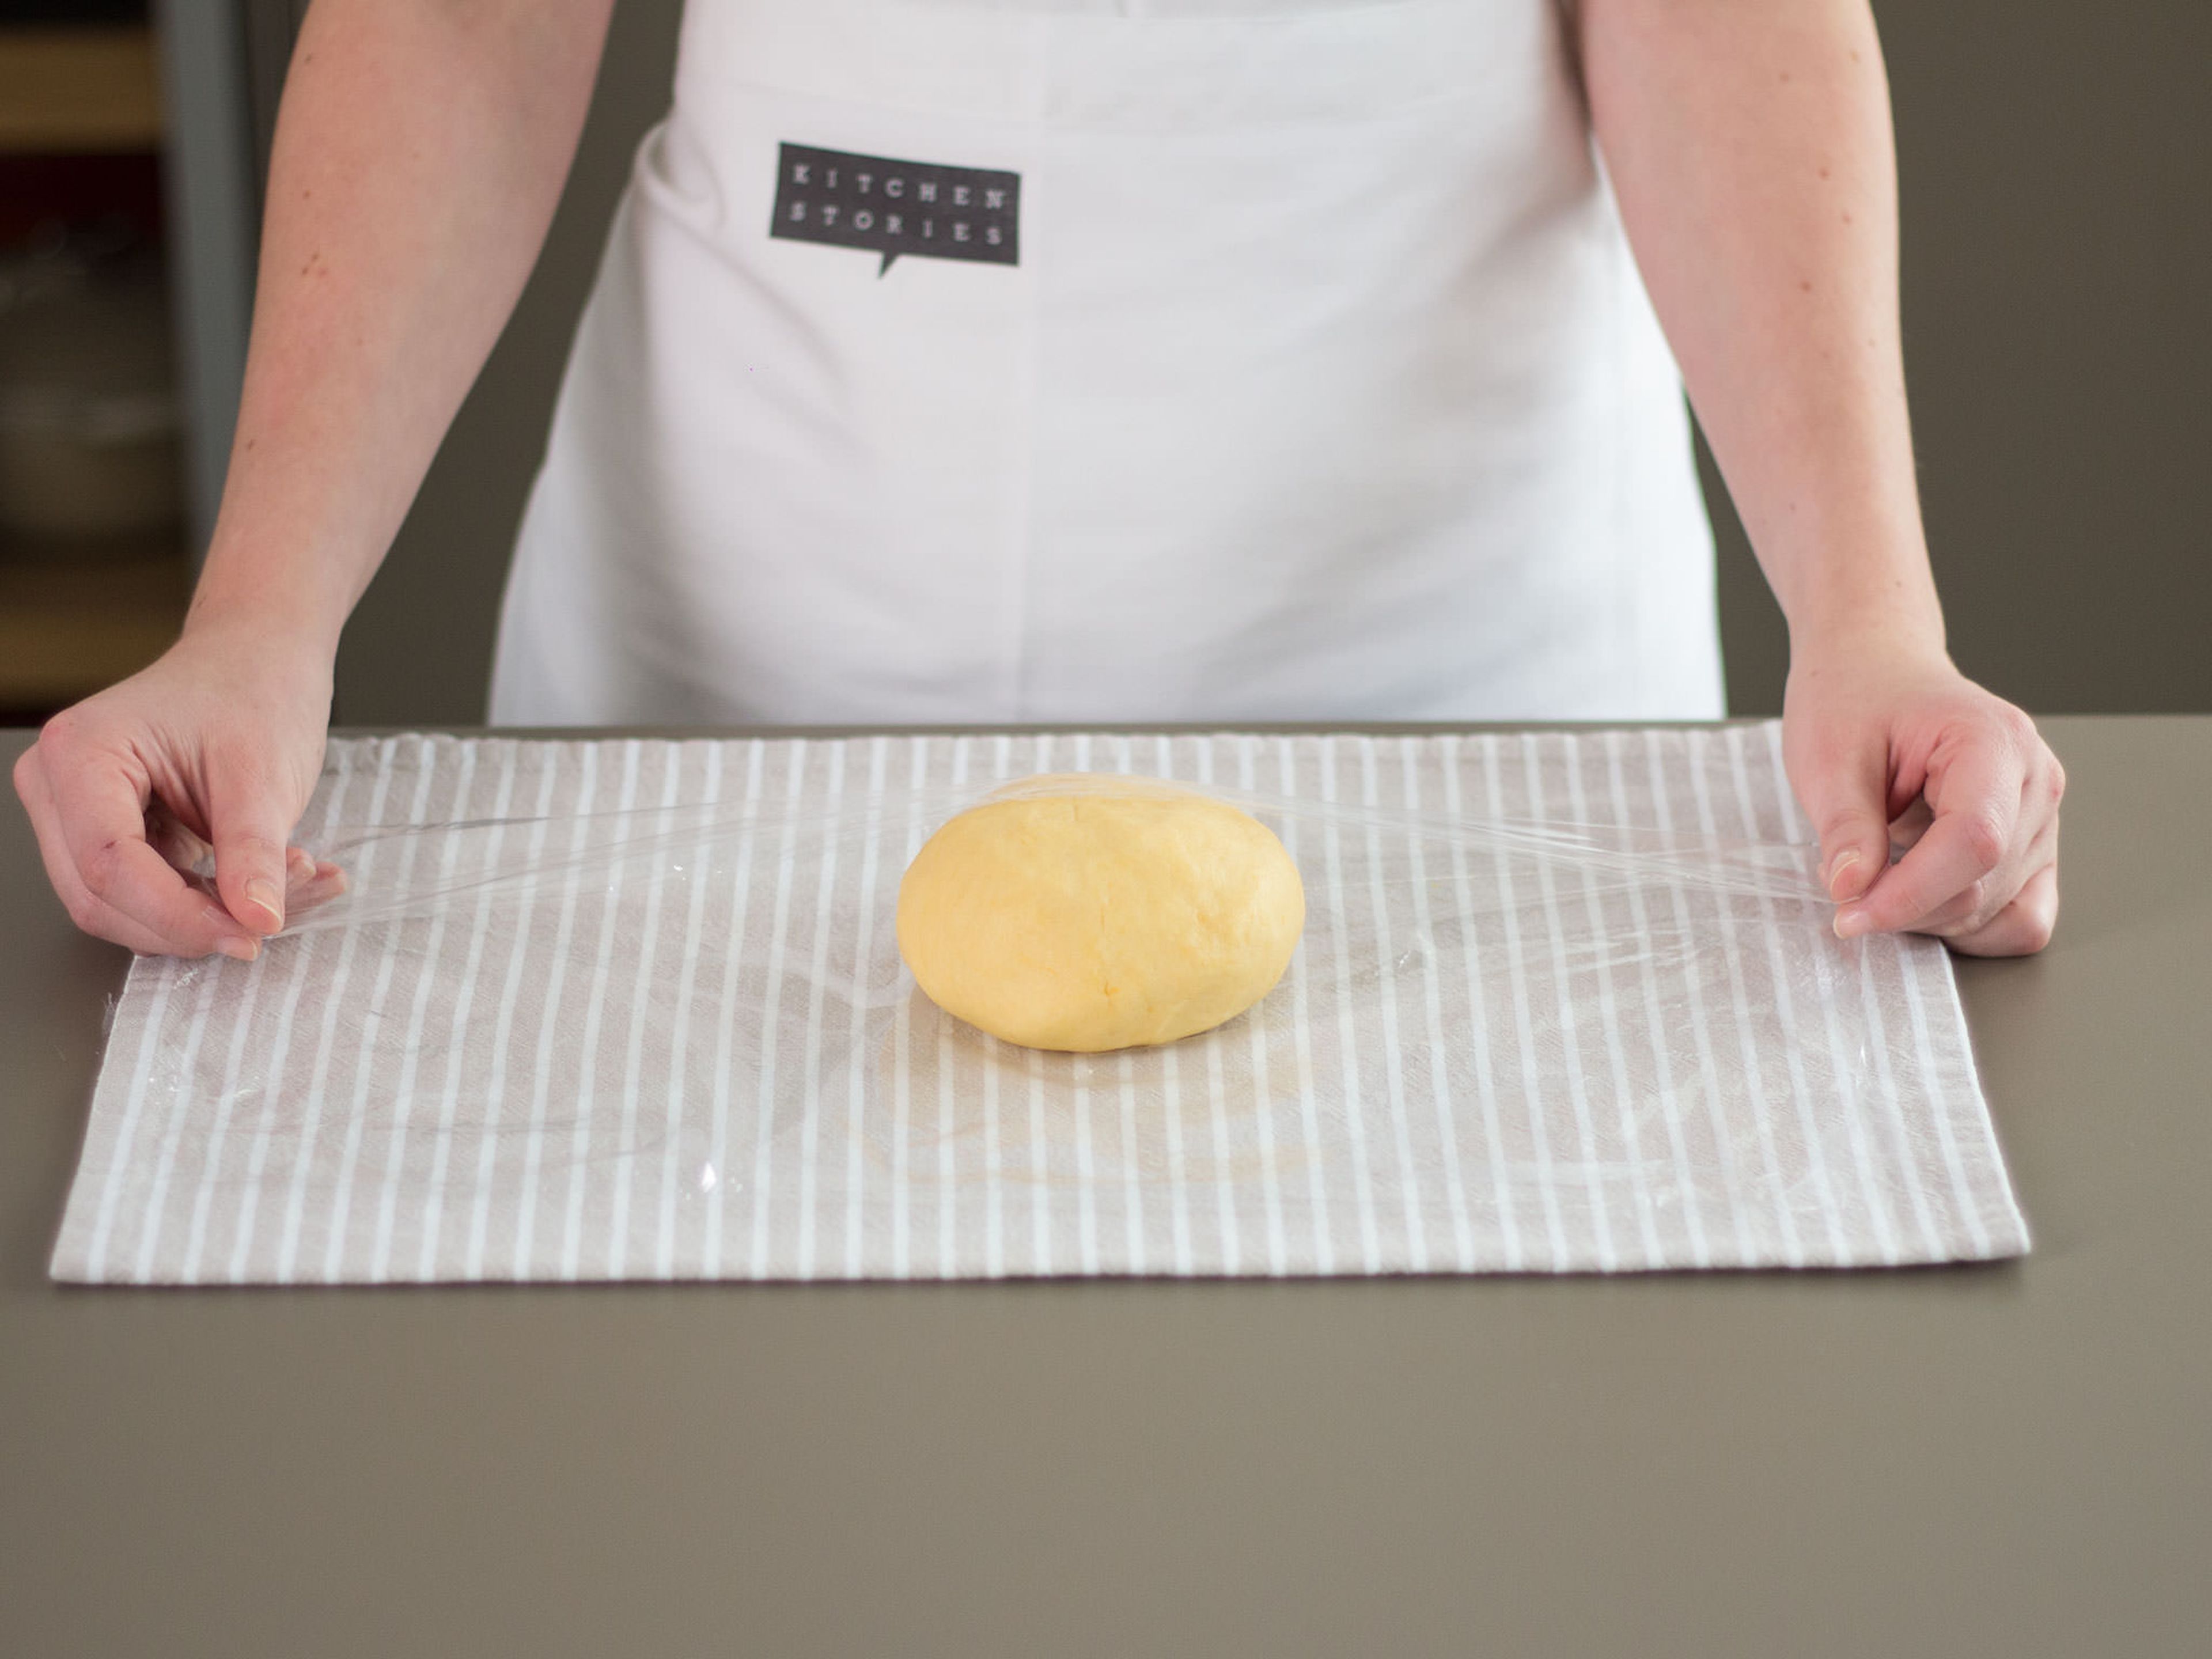 Place dough in plastic wrap, transfer to refrigerator, and let rest for approx. 30 min.